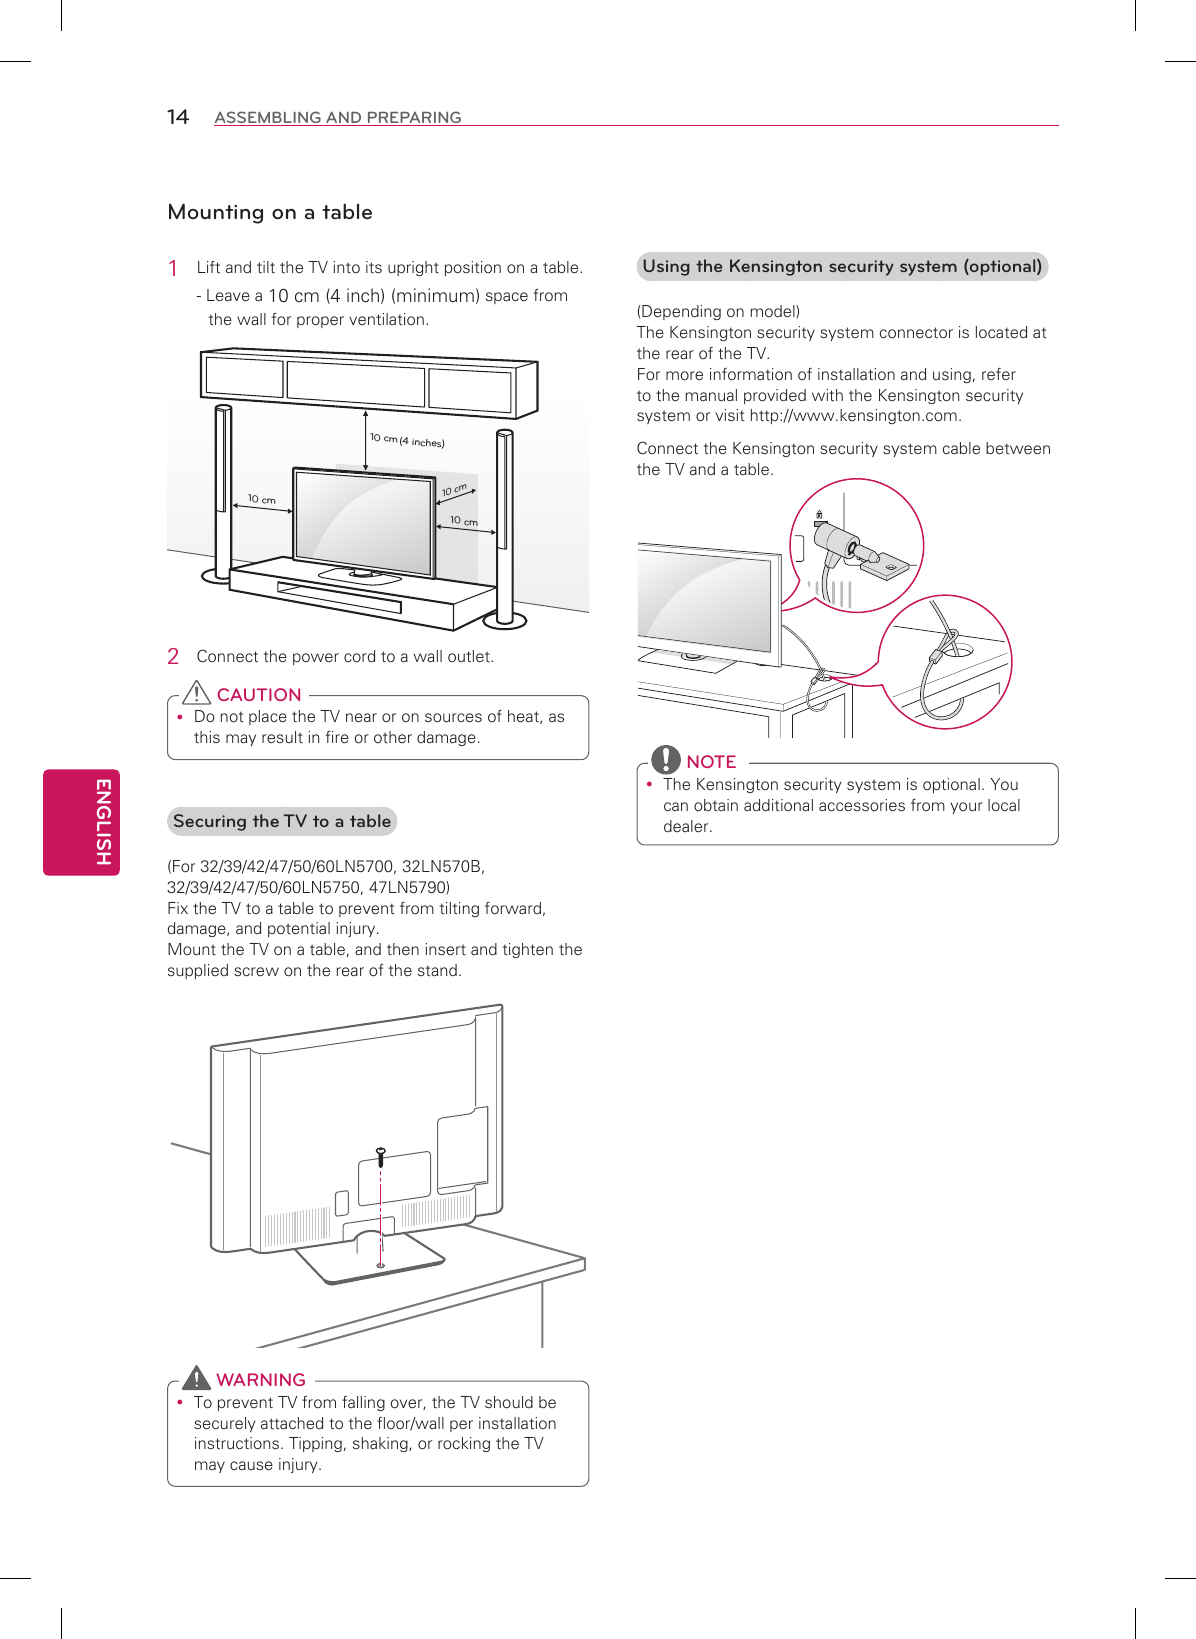 ENGLISH14 ASSEMBLING AND PREPARINGMounting on a table1  Lift and tilt the TV into its upright position on a table.- Leave a 10 cm (4 inch) (minimum) space from the wall for proper ventilation.10 cm10 cm10 cm10 cm(4 inches)2  Connect the power cord to a wall outlet. Do not place the TV near or on sources of heat, as this may result in fire or other damage. CAUTIONSecuring the TV to a table(For 32/39/42/47/50/60LN5700, 32LN570B, 32/39/42/47/50/60LN5750, 47LN5790) Fix the TV to a table to prevent from tilting forward, damage, and potential injury. Mount the TV on a table, and then insert and tighten the supplied screw on the rear of the stand. To prevent TV from falling over, the TV should be securely attached to the floor/wall per installation instructions. Tipping, shaking, or rocking the TV may cause injury. WARNINGUsing the Kensington security system (optional)(Depending on model) The Kensington security system connector is located at the rear of the TV.  For more information of installation and using, refer to the manual provided with the Kensington security system or visit http://www.kensington.com.Connect the Kensington security system cable between the TV and a table. The Kensington security system is optional. You can obtain additional accessories from your local dealer. NOTE